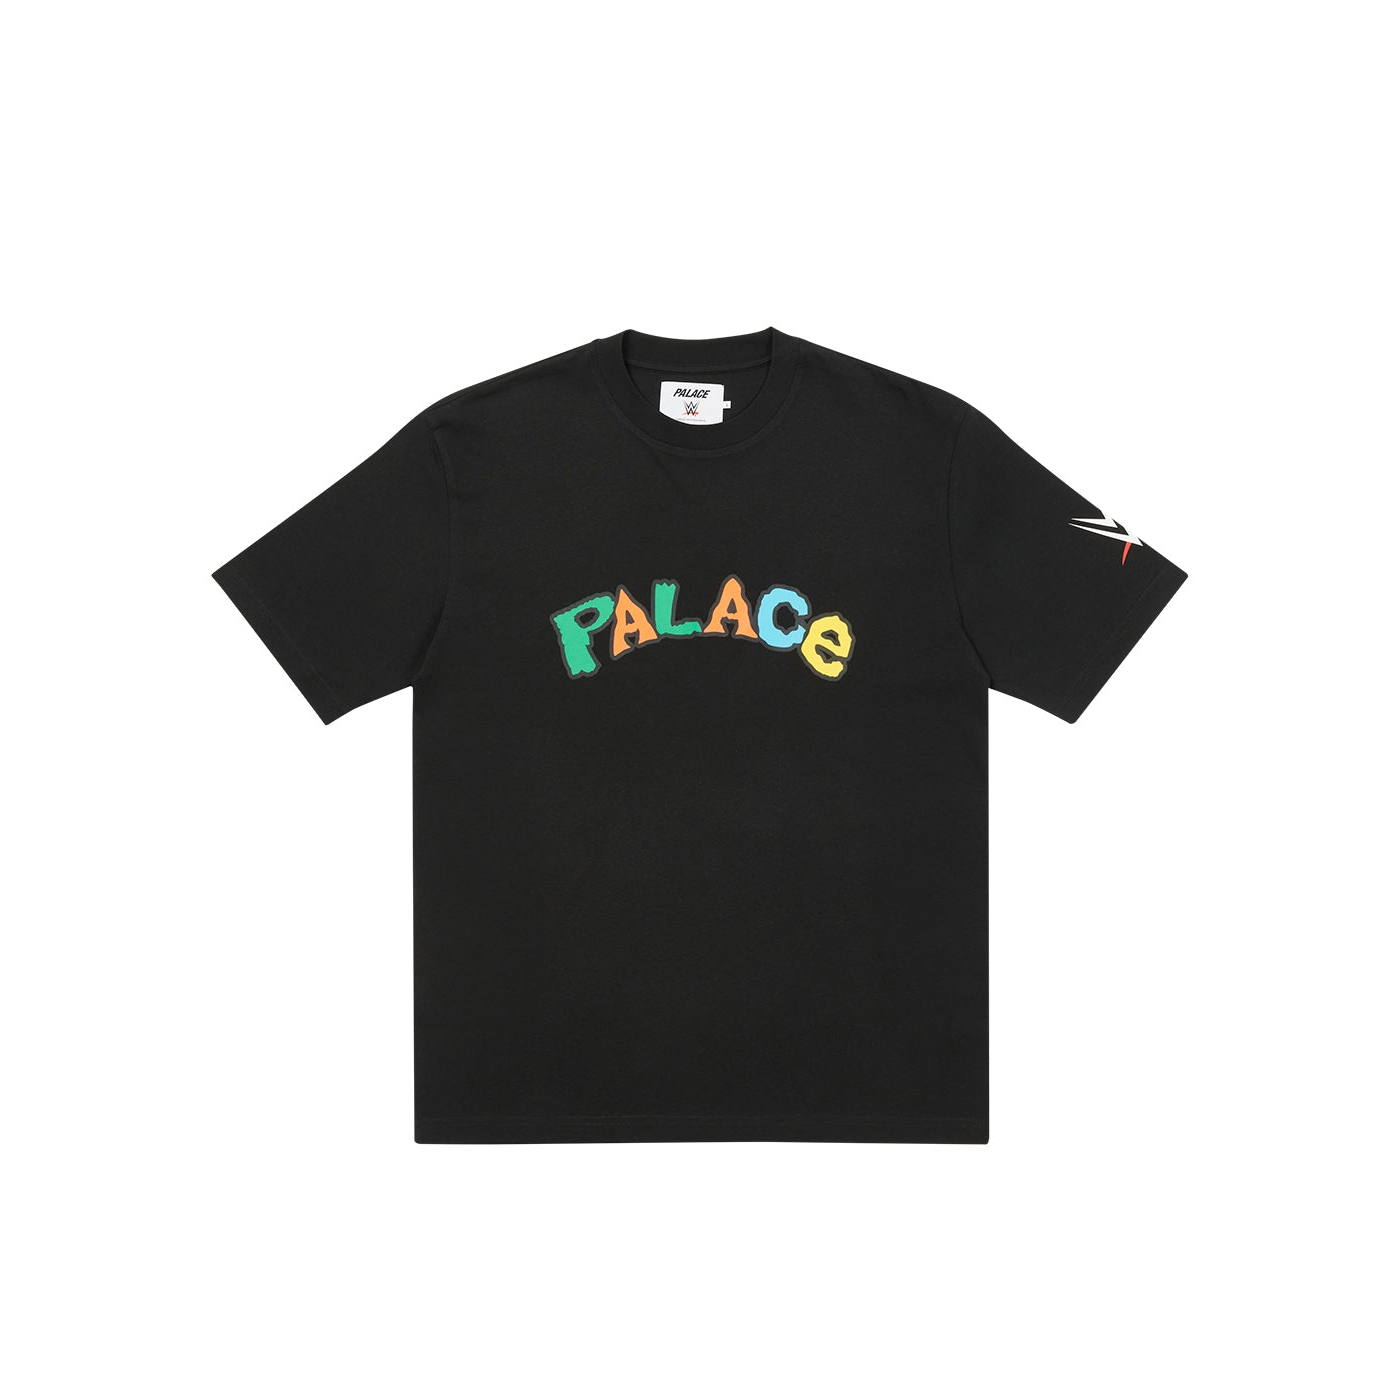 Thumbnail PALACE WWE NICE DAY T-SHIRT BLACK one color